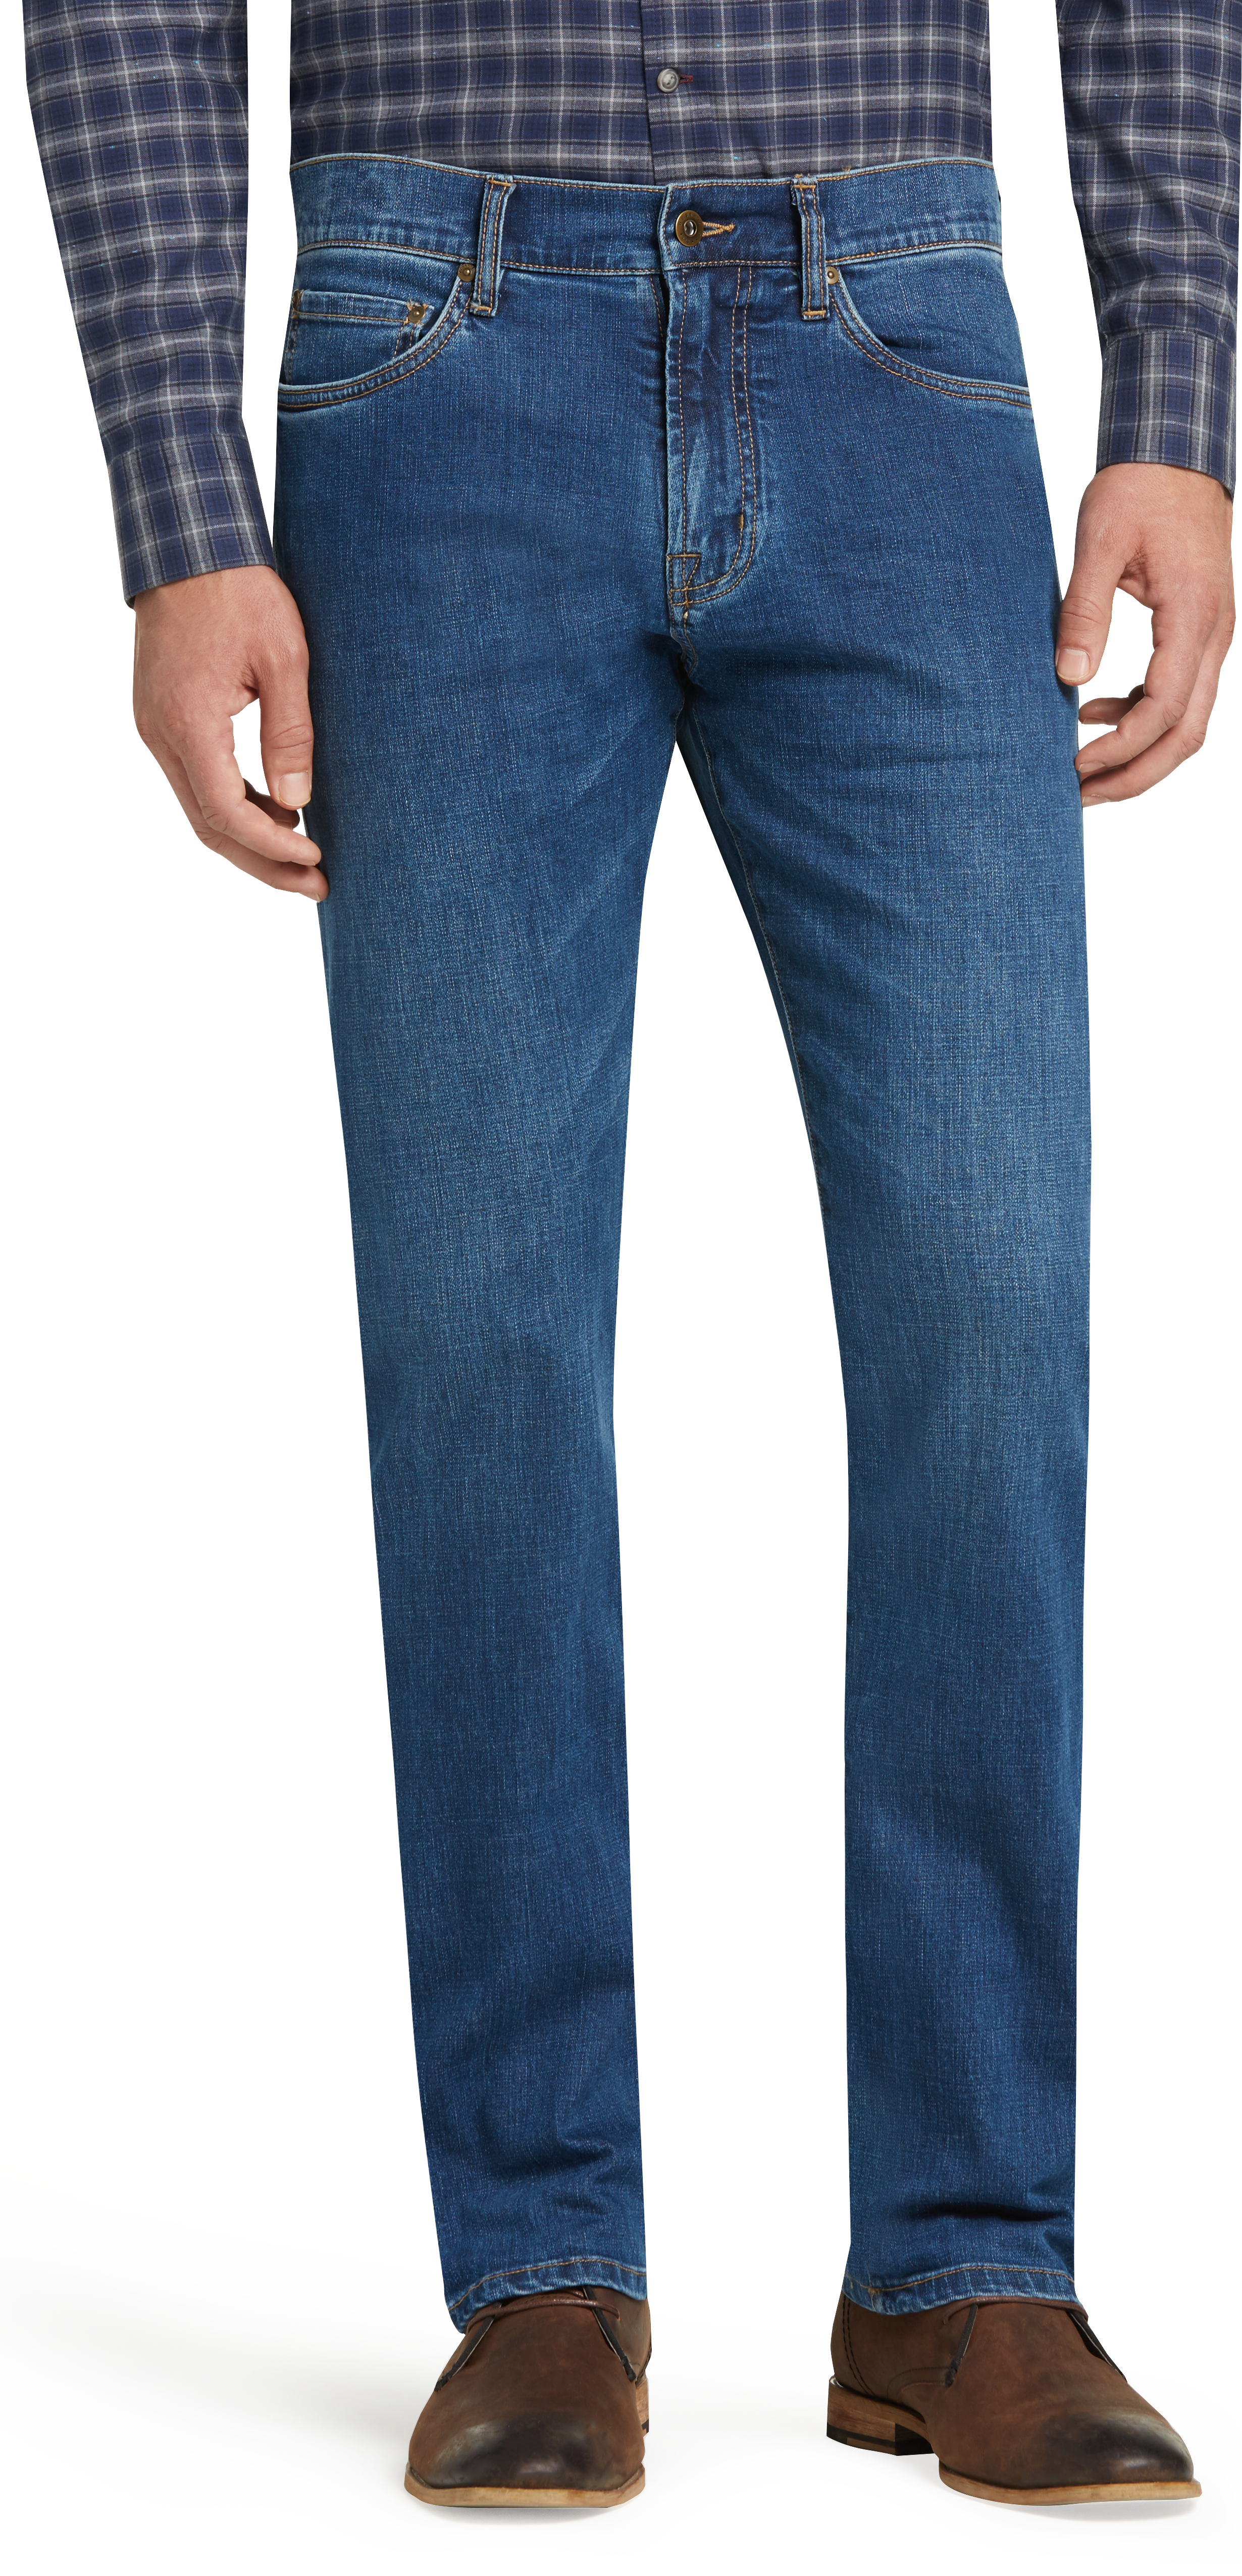 top jean brands for guys